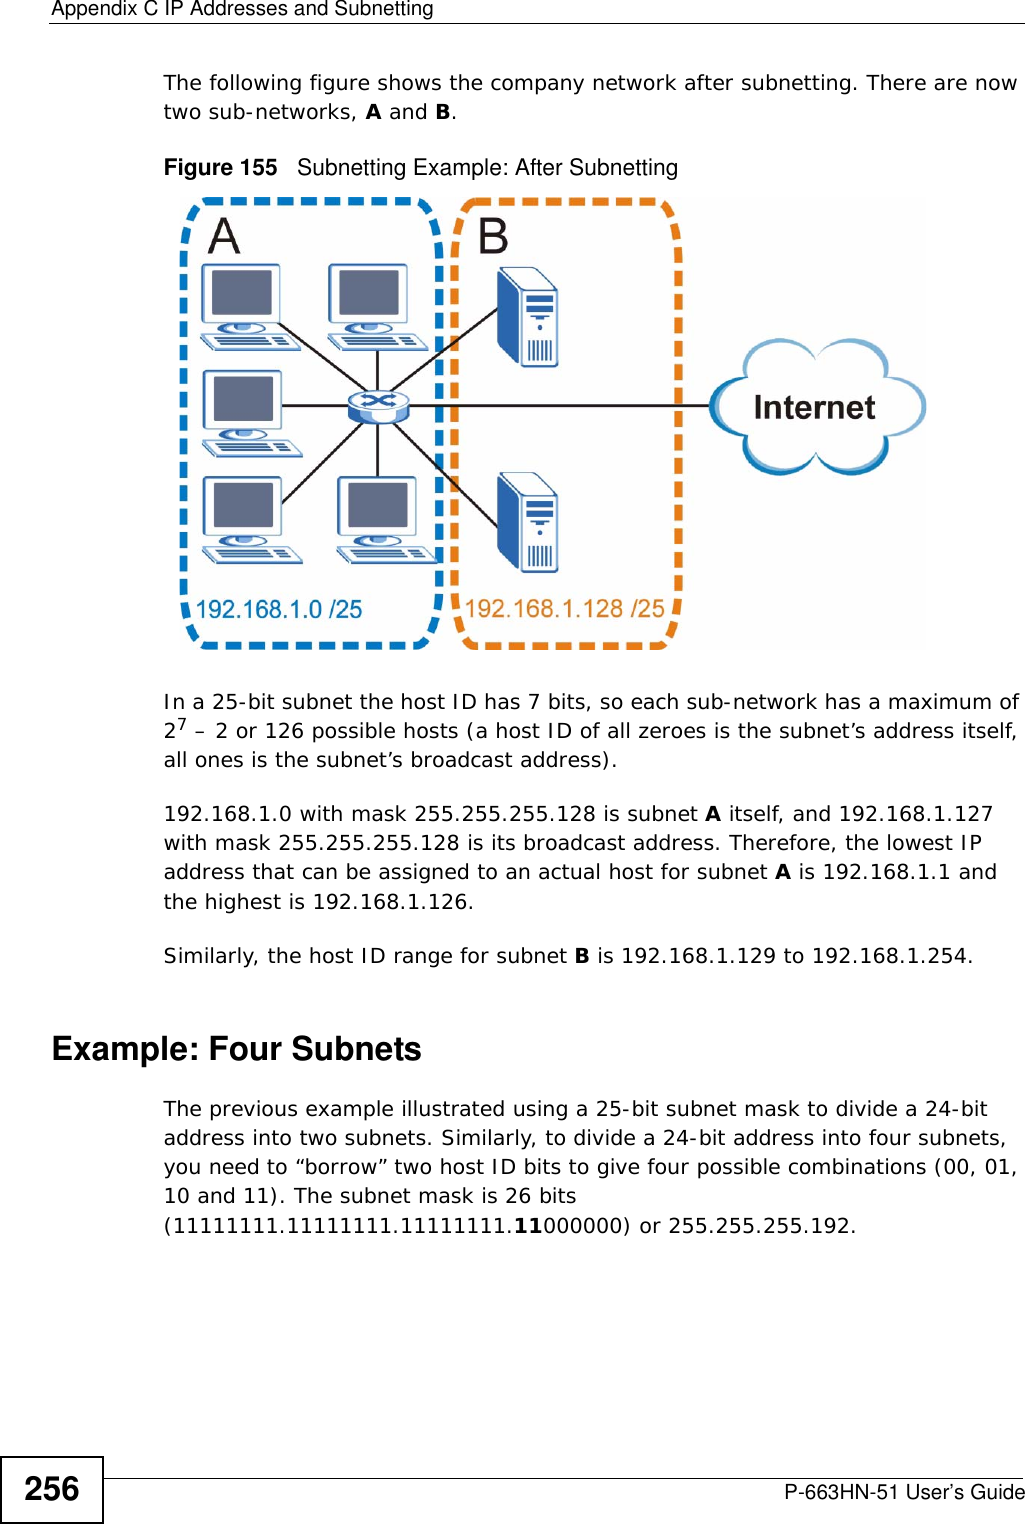 Appendix C IP Addresses and SubnettingP-663HN-51 User’s Guide256The following figure shows the company network after subnetting. There are now two sub-networks, A and B. Figure 155   Subnetting Example: After SubnettingIn a 25-bit subnet the host ID has 7 bits, so each sub-network has a maximum of 27 – 2 or 126 possible hosts (a host ID of all zeroes is the subnet’s address itself, all ones is the subnet’s broadcast address).192.168.1.0 with mask 255.255.255.128 is subnet A itself, and 192.168.1.127 with mask 255.255.255.128 is its broadcast address. Therefore, the lowest IP address that can be assigned to an actual host for subnet A is 192.168.1.1 and the highest is 192.168.1.126. Similarly, the host ID range for subnet B is 192.168.1.129 to 192.168.1.254.Example: Four Subnets The previous example illustrated using a 25-bit subnet mask to divide a 24-bit address into two subnets. Similarly, to divide a 24-bit address into four subnets, you need to “borrow” two host ID bits to give four possible combinations (00, 01, 10 and 11). The subnet mask is 26 bits (11111111.11111111.11111111.11000000) or 255.255.255.192. 